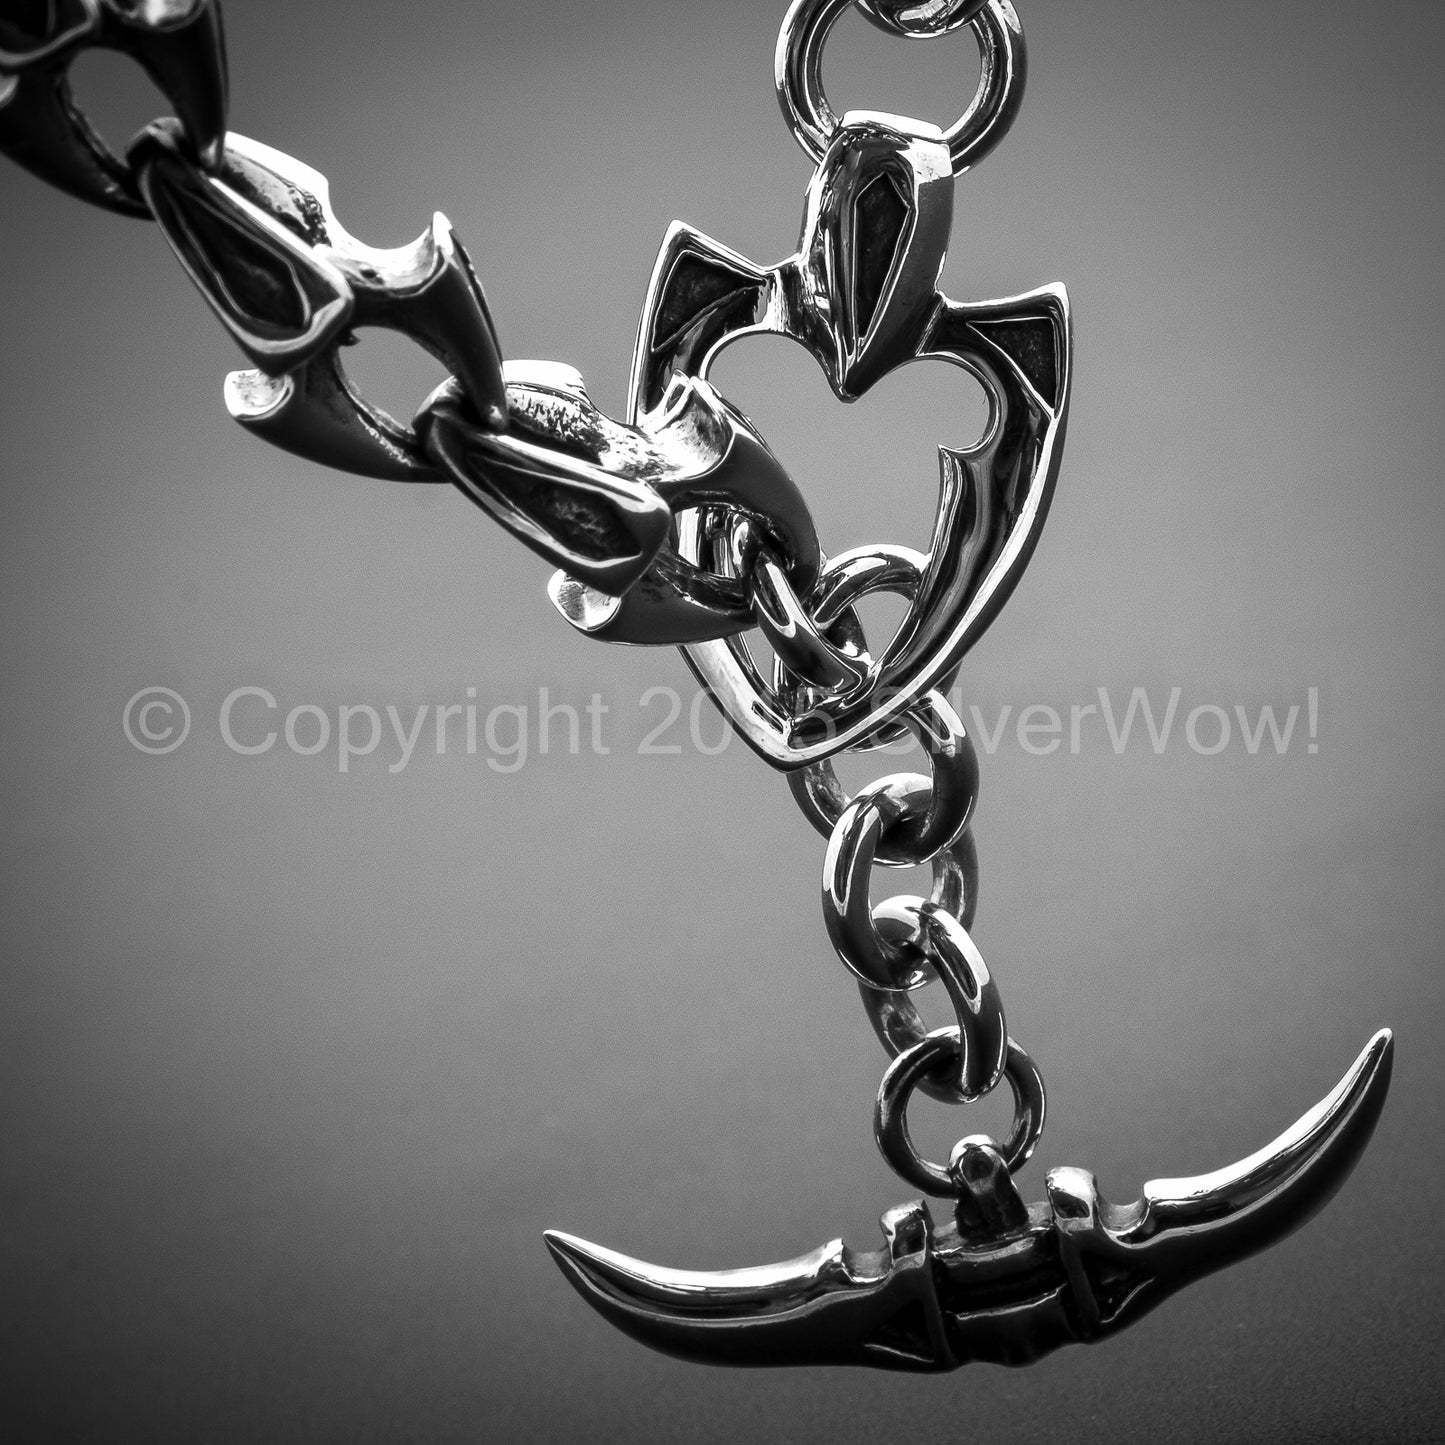 Shark Link Bracelet with Toggle Clasp